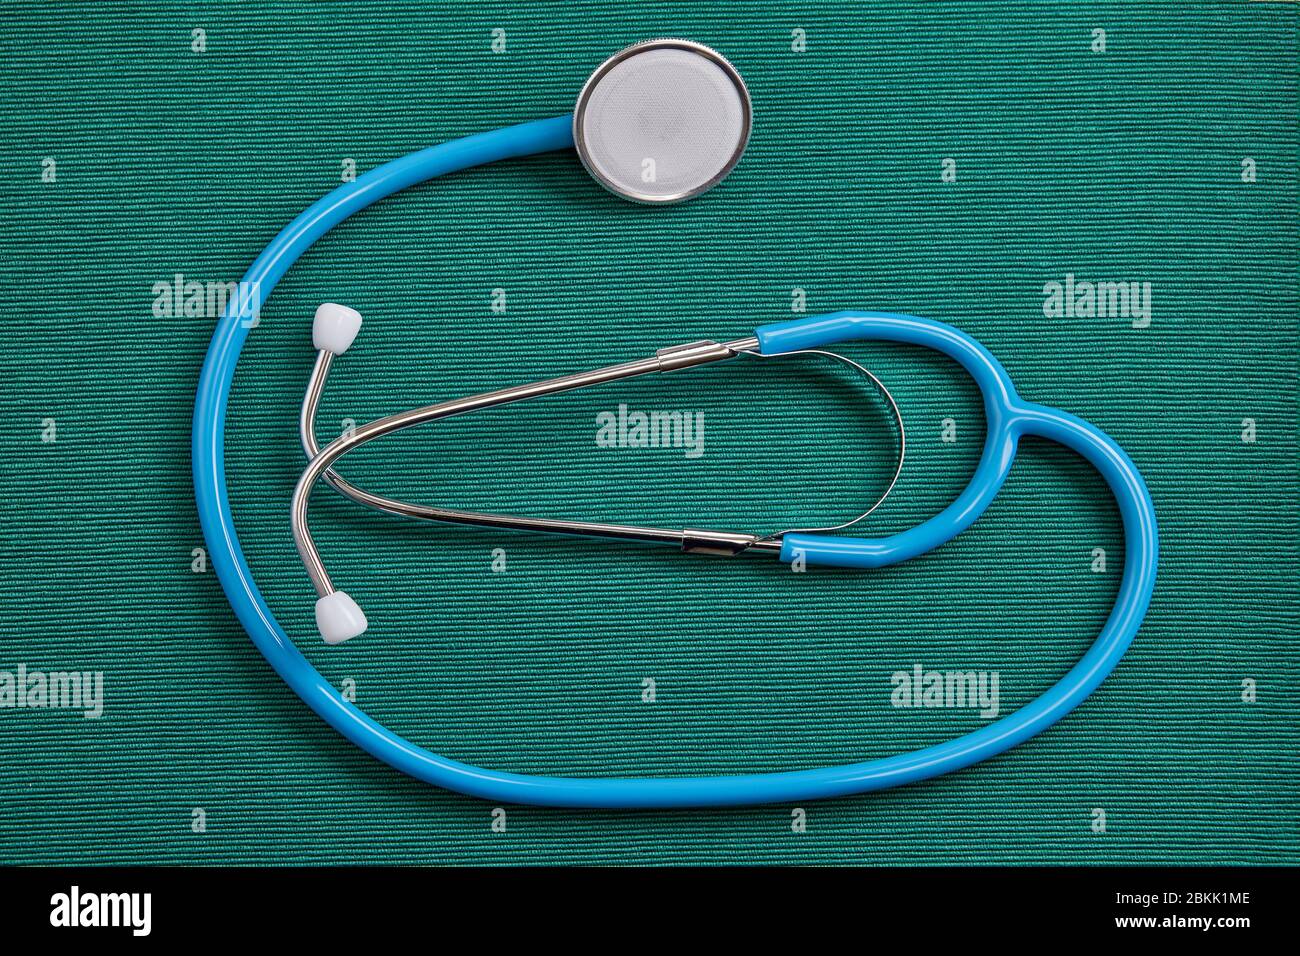 Stethoscope is an acoustic medical device for listening to internal sounds of body. Medical tool can be used to listen to sound made by the heart, lun Stock Photo